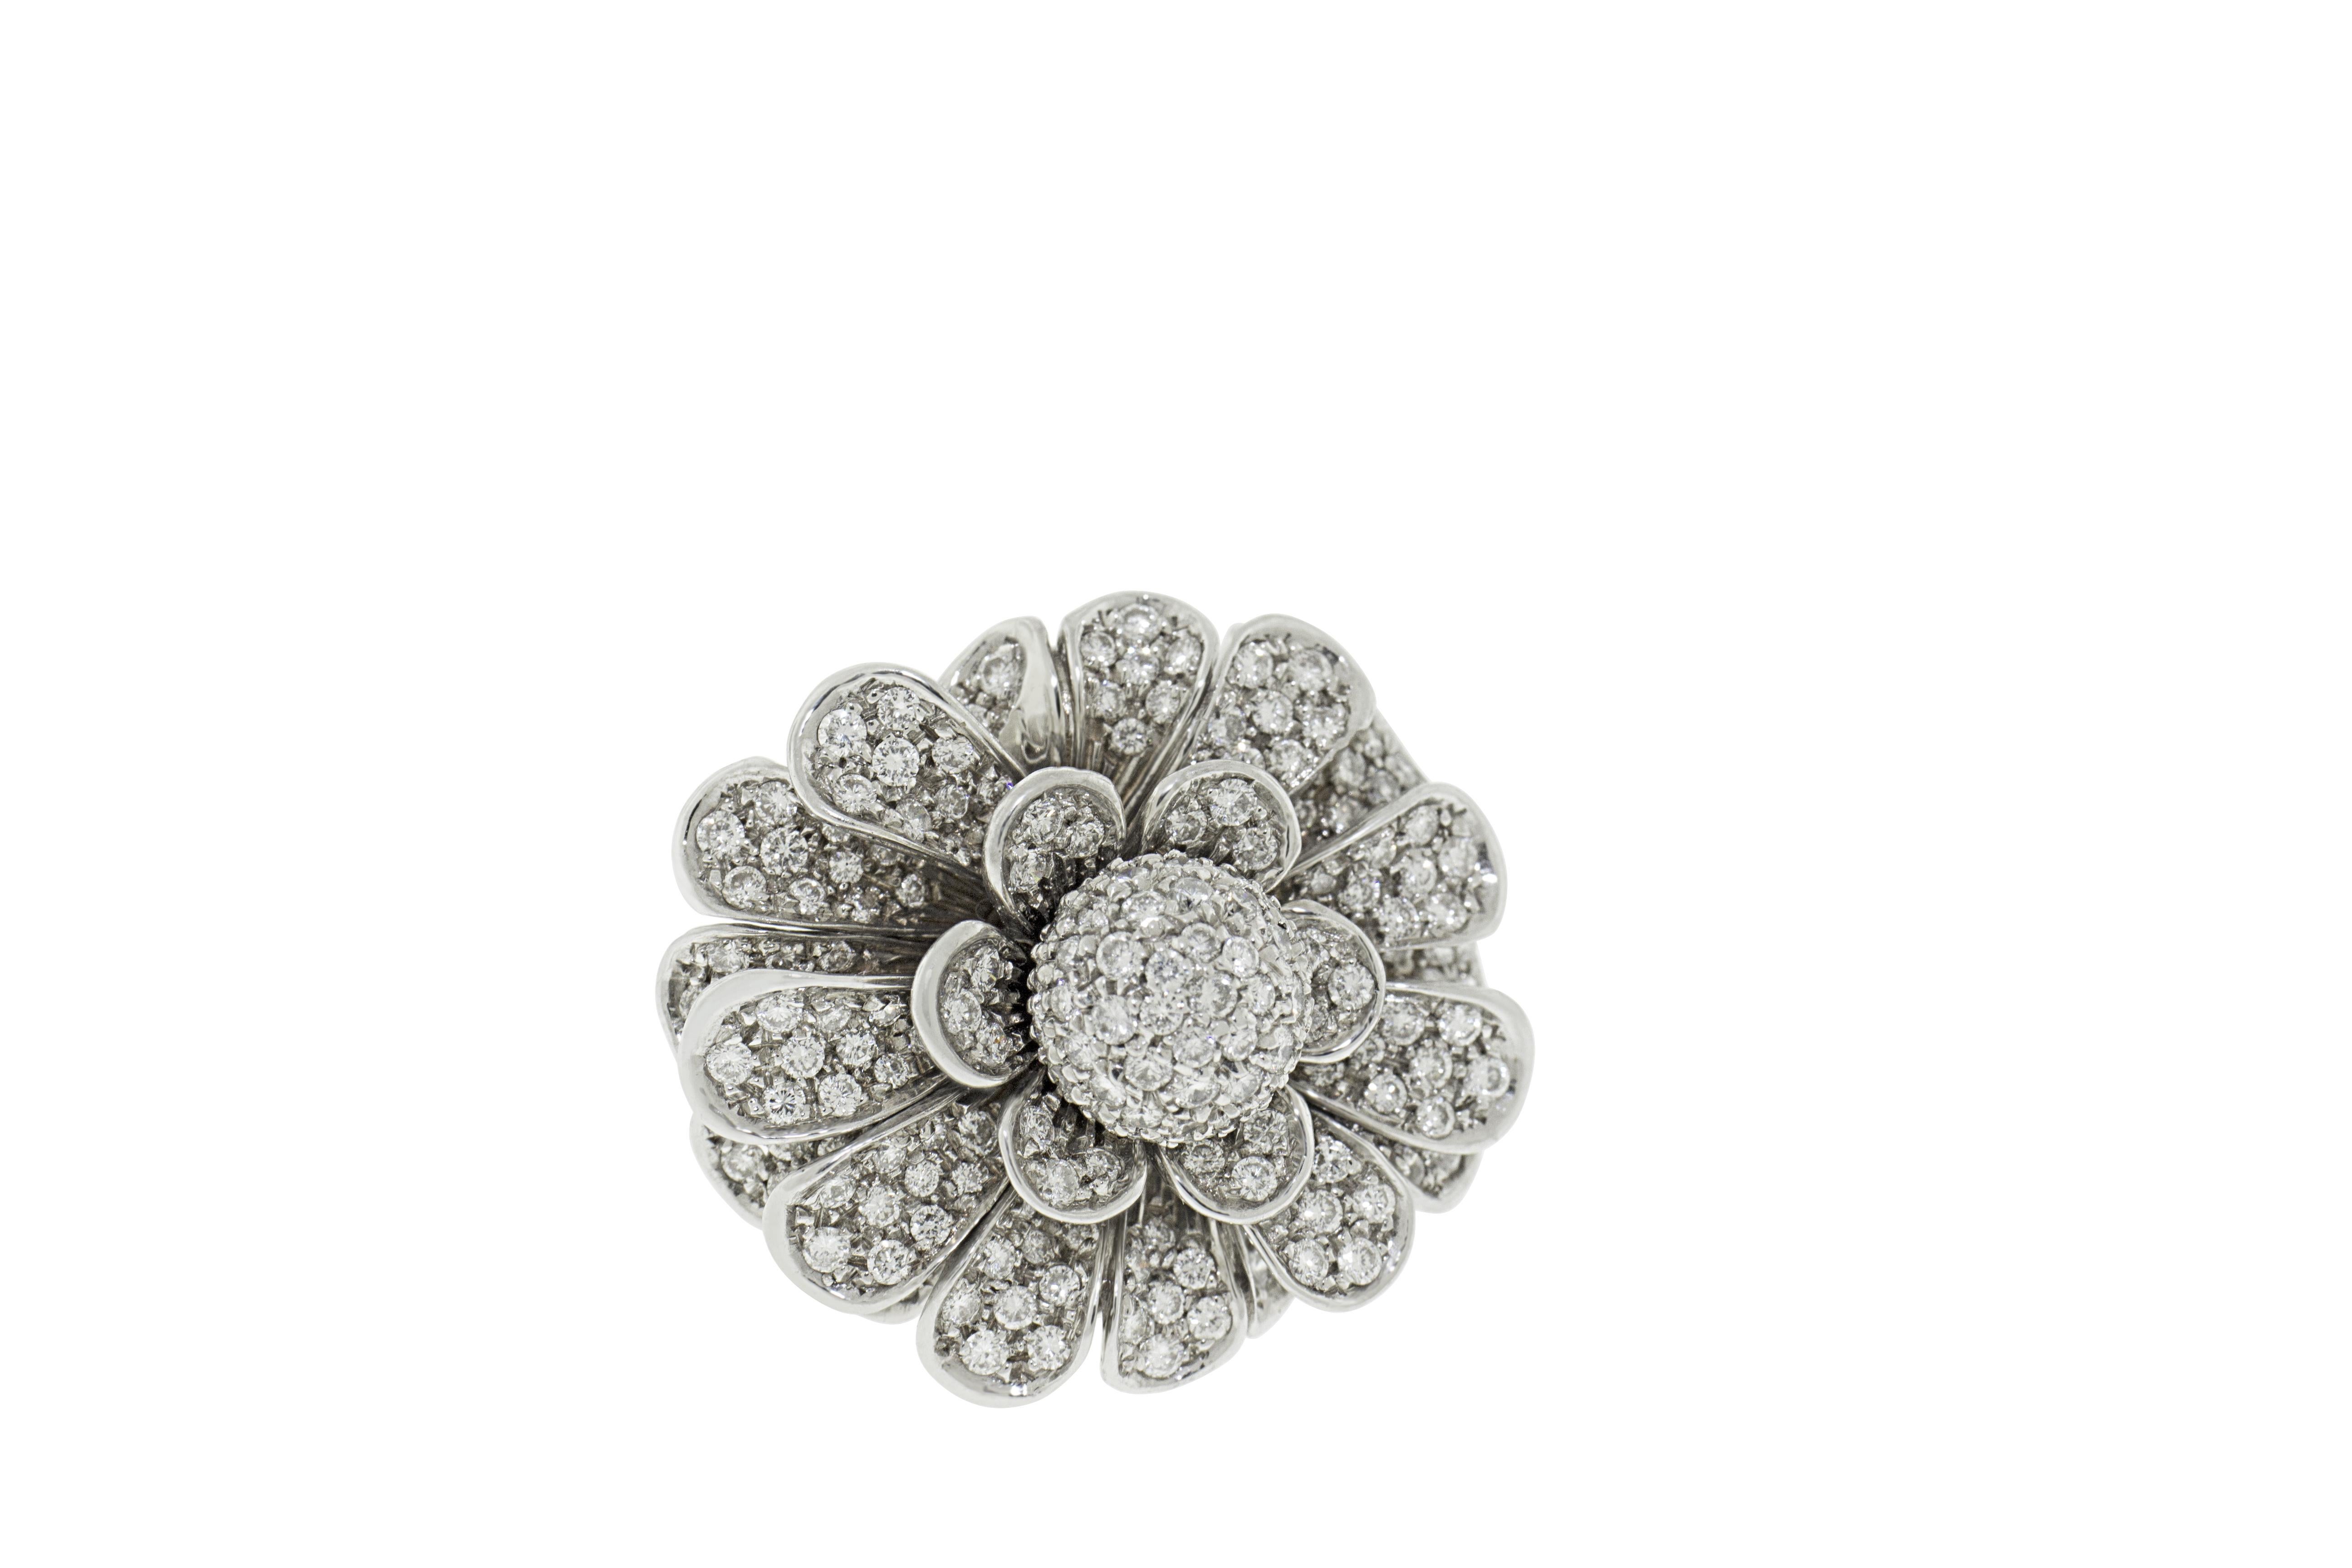 This ring features 3 carats of G VS pave diamonds set in 18K white gold. This intricate cocktail ring has unique floral petals that move mimicking a life like flower petal with each movement of the hand. Total weight 25 grams. Made in Italy. Size